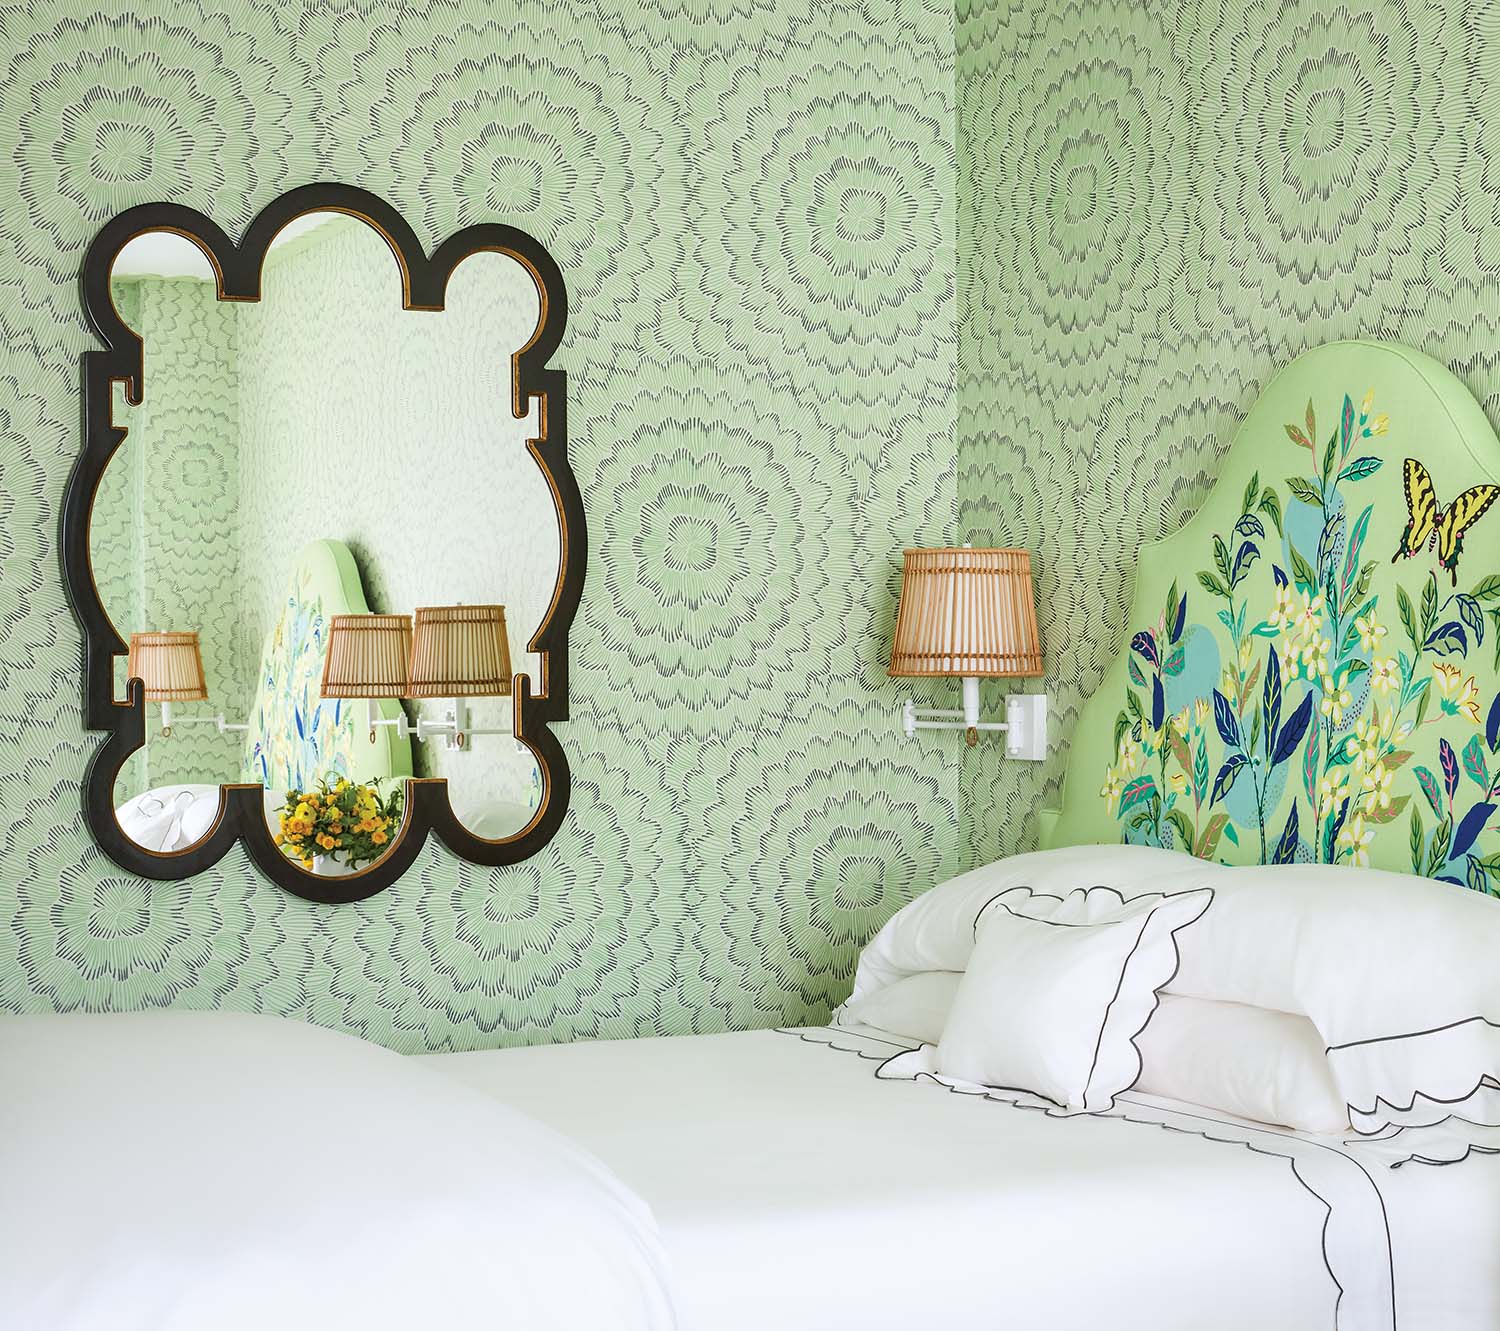 Swirling green wallpaper envelopes a hotel room with a crisp clean bed.